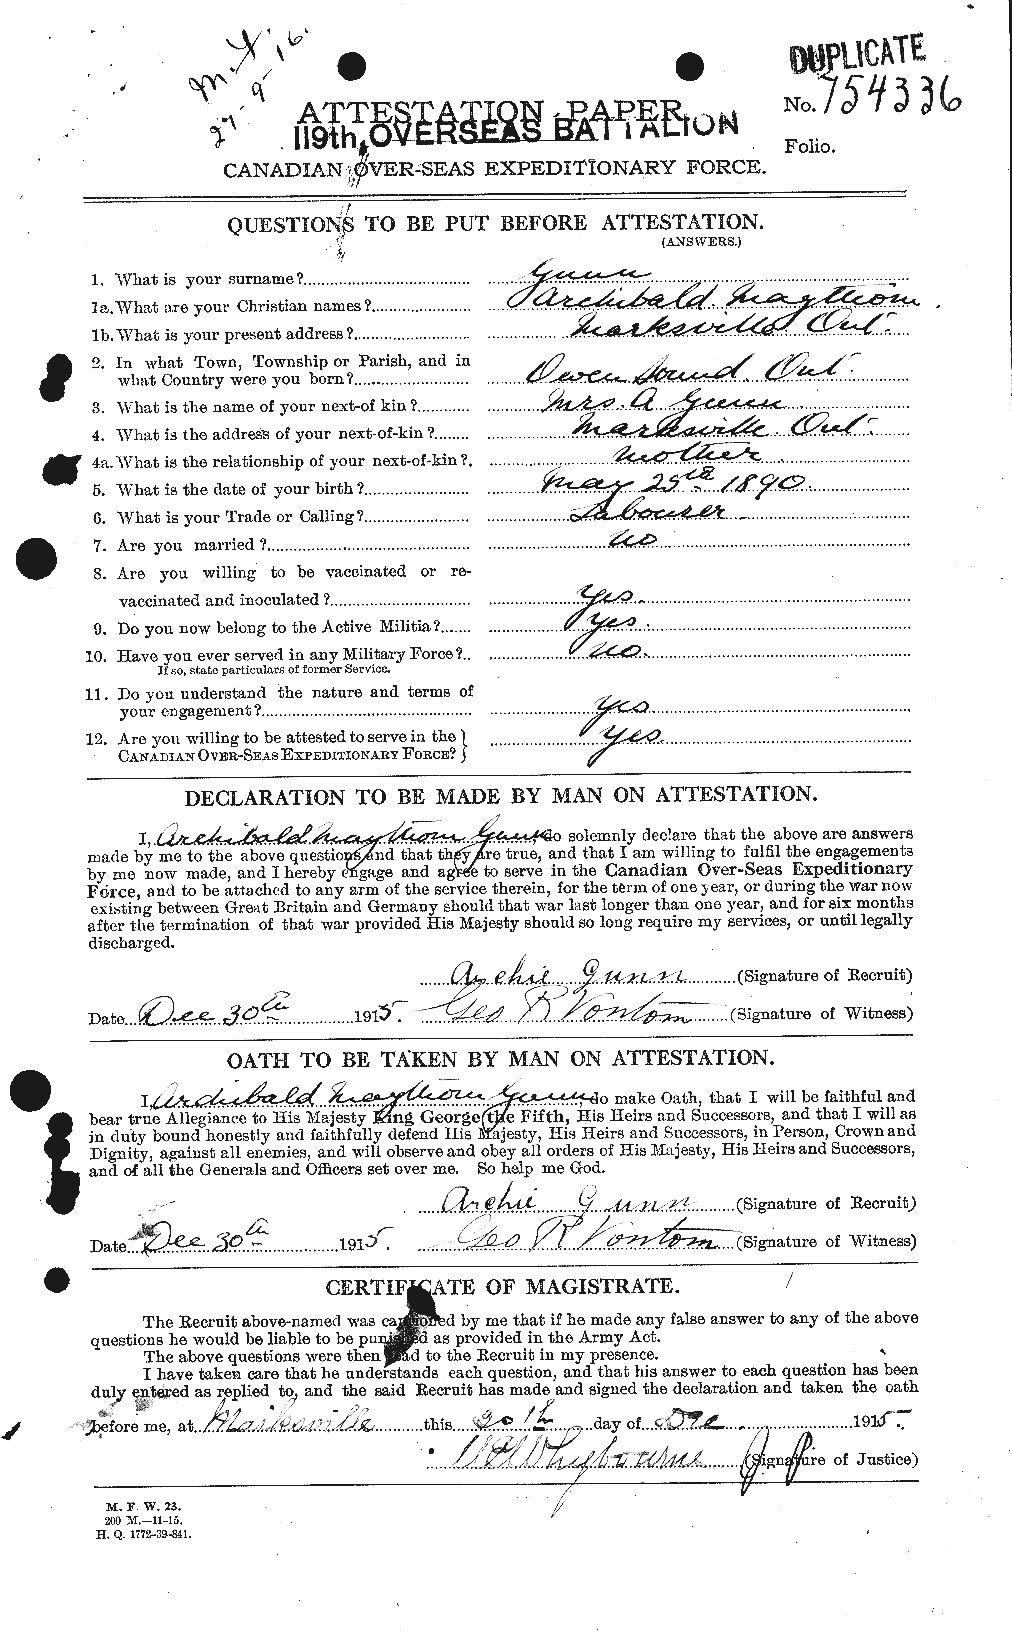 Personnel Records of the First World War - CEF 367999a